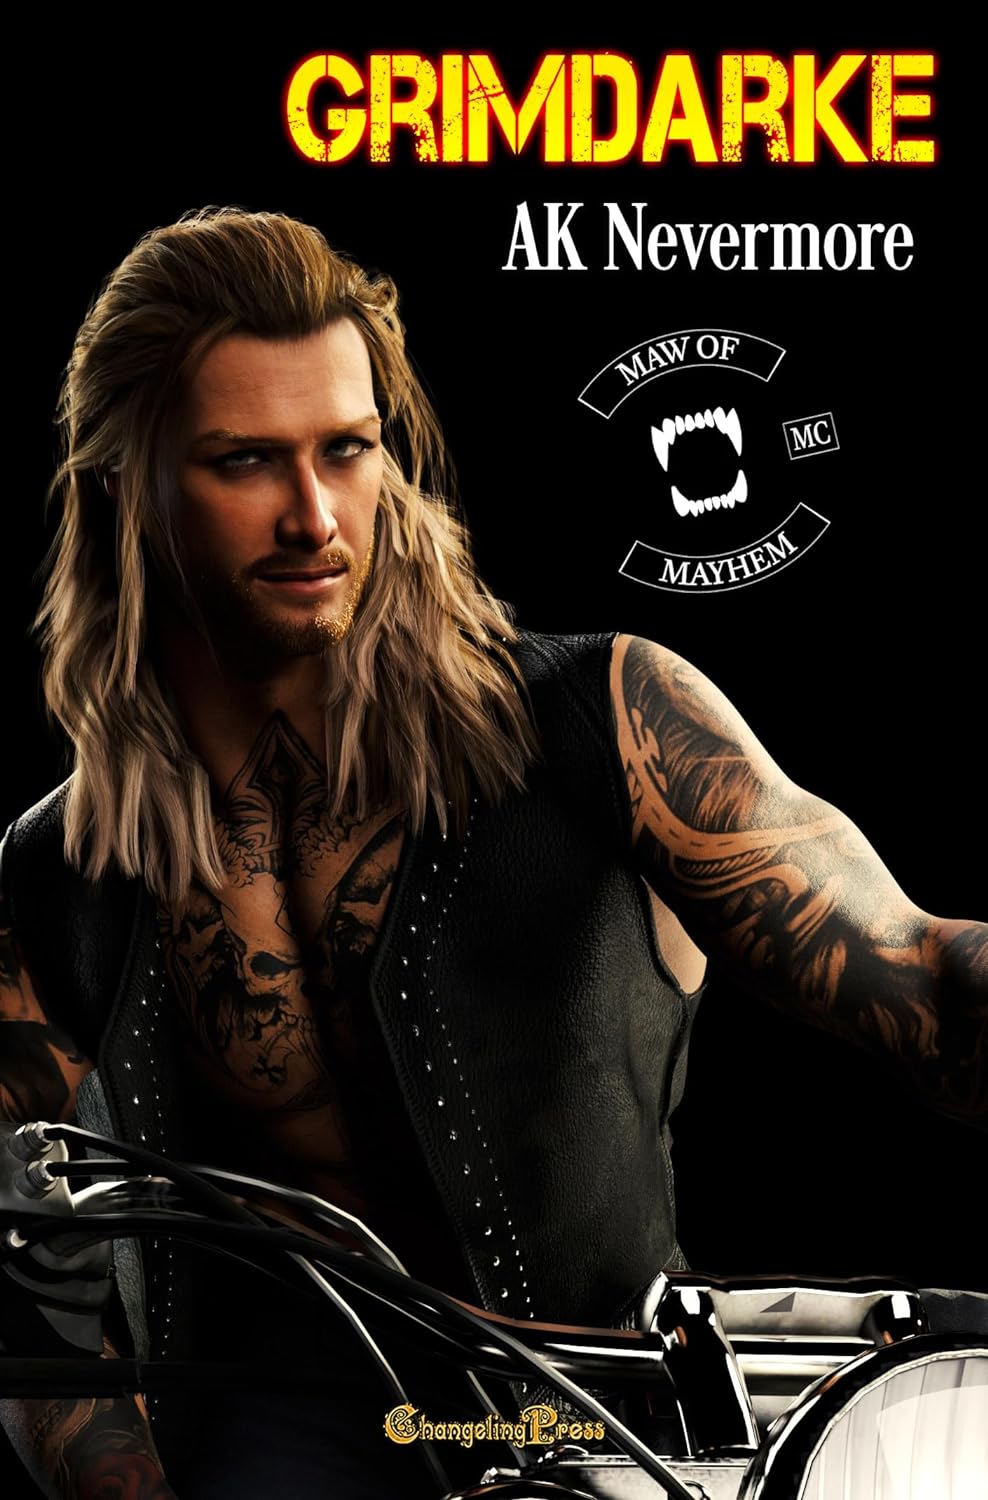 The front cover of Grimdarke by AK Nevermore